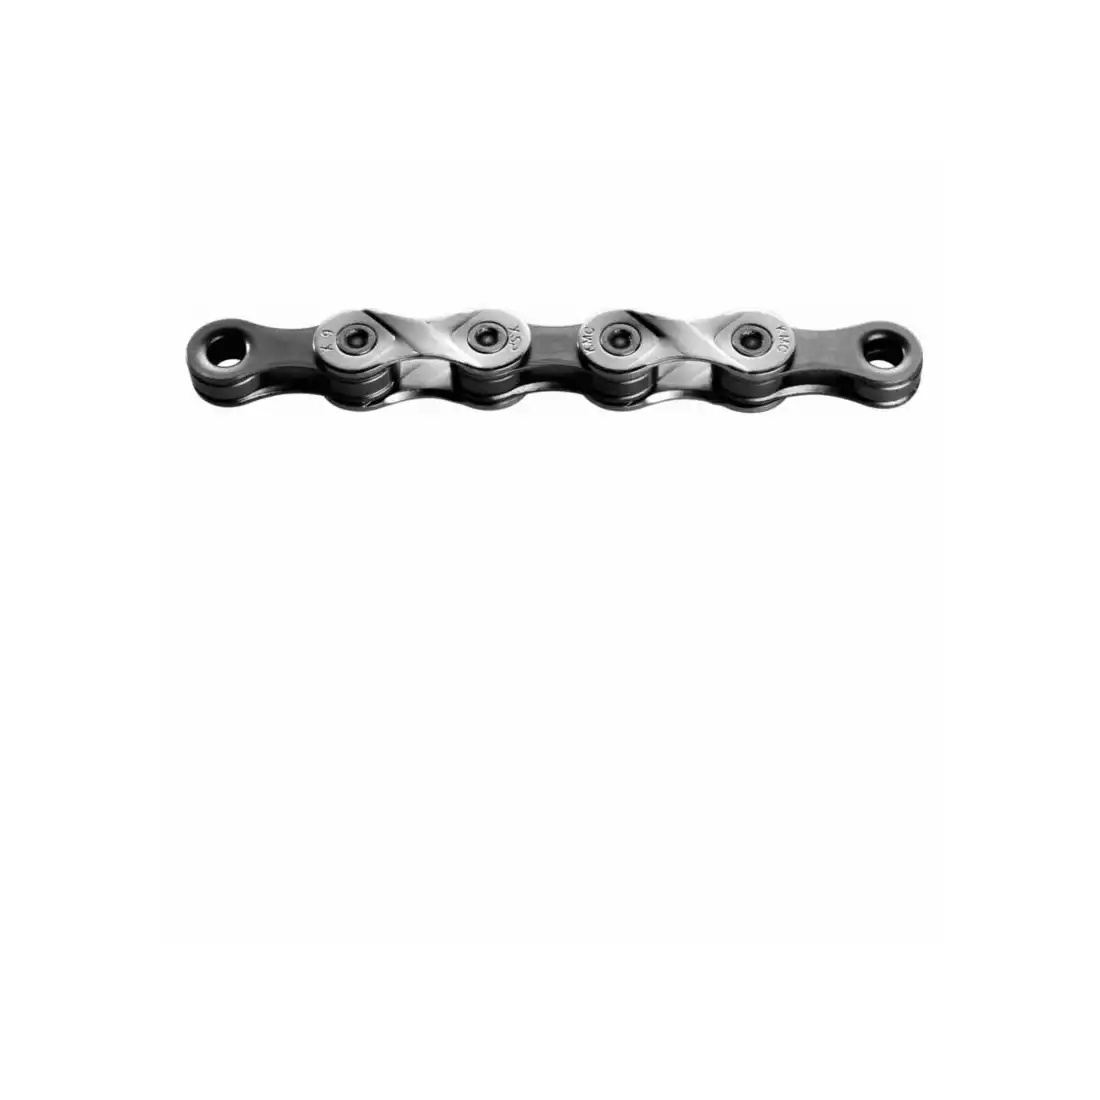 KMC X9 chain, 9-speed, 116 links, silver gray | MikeSPORT